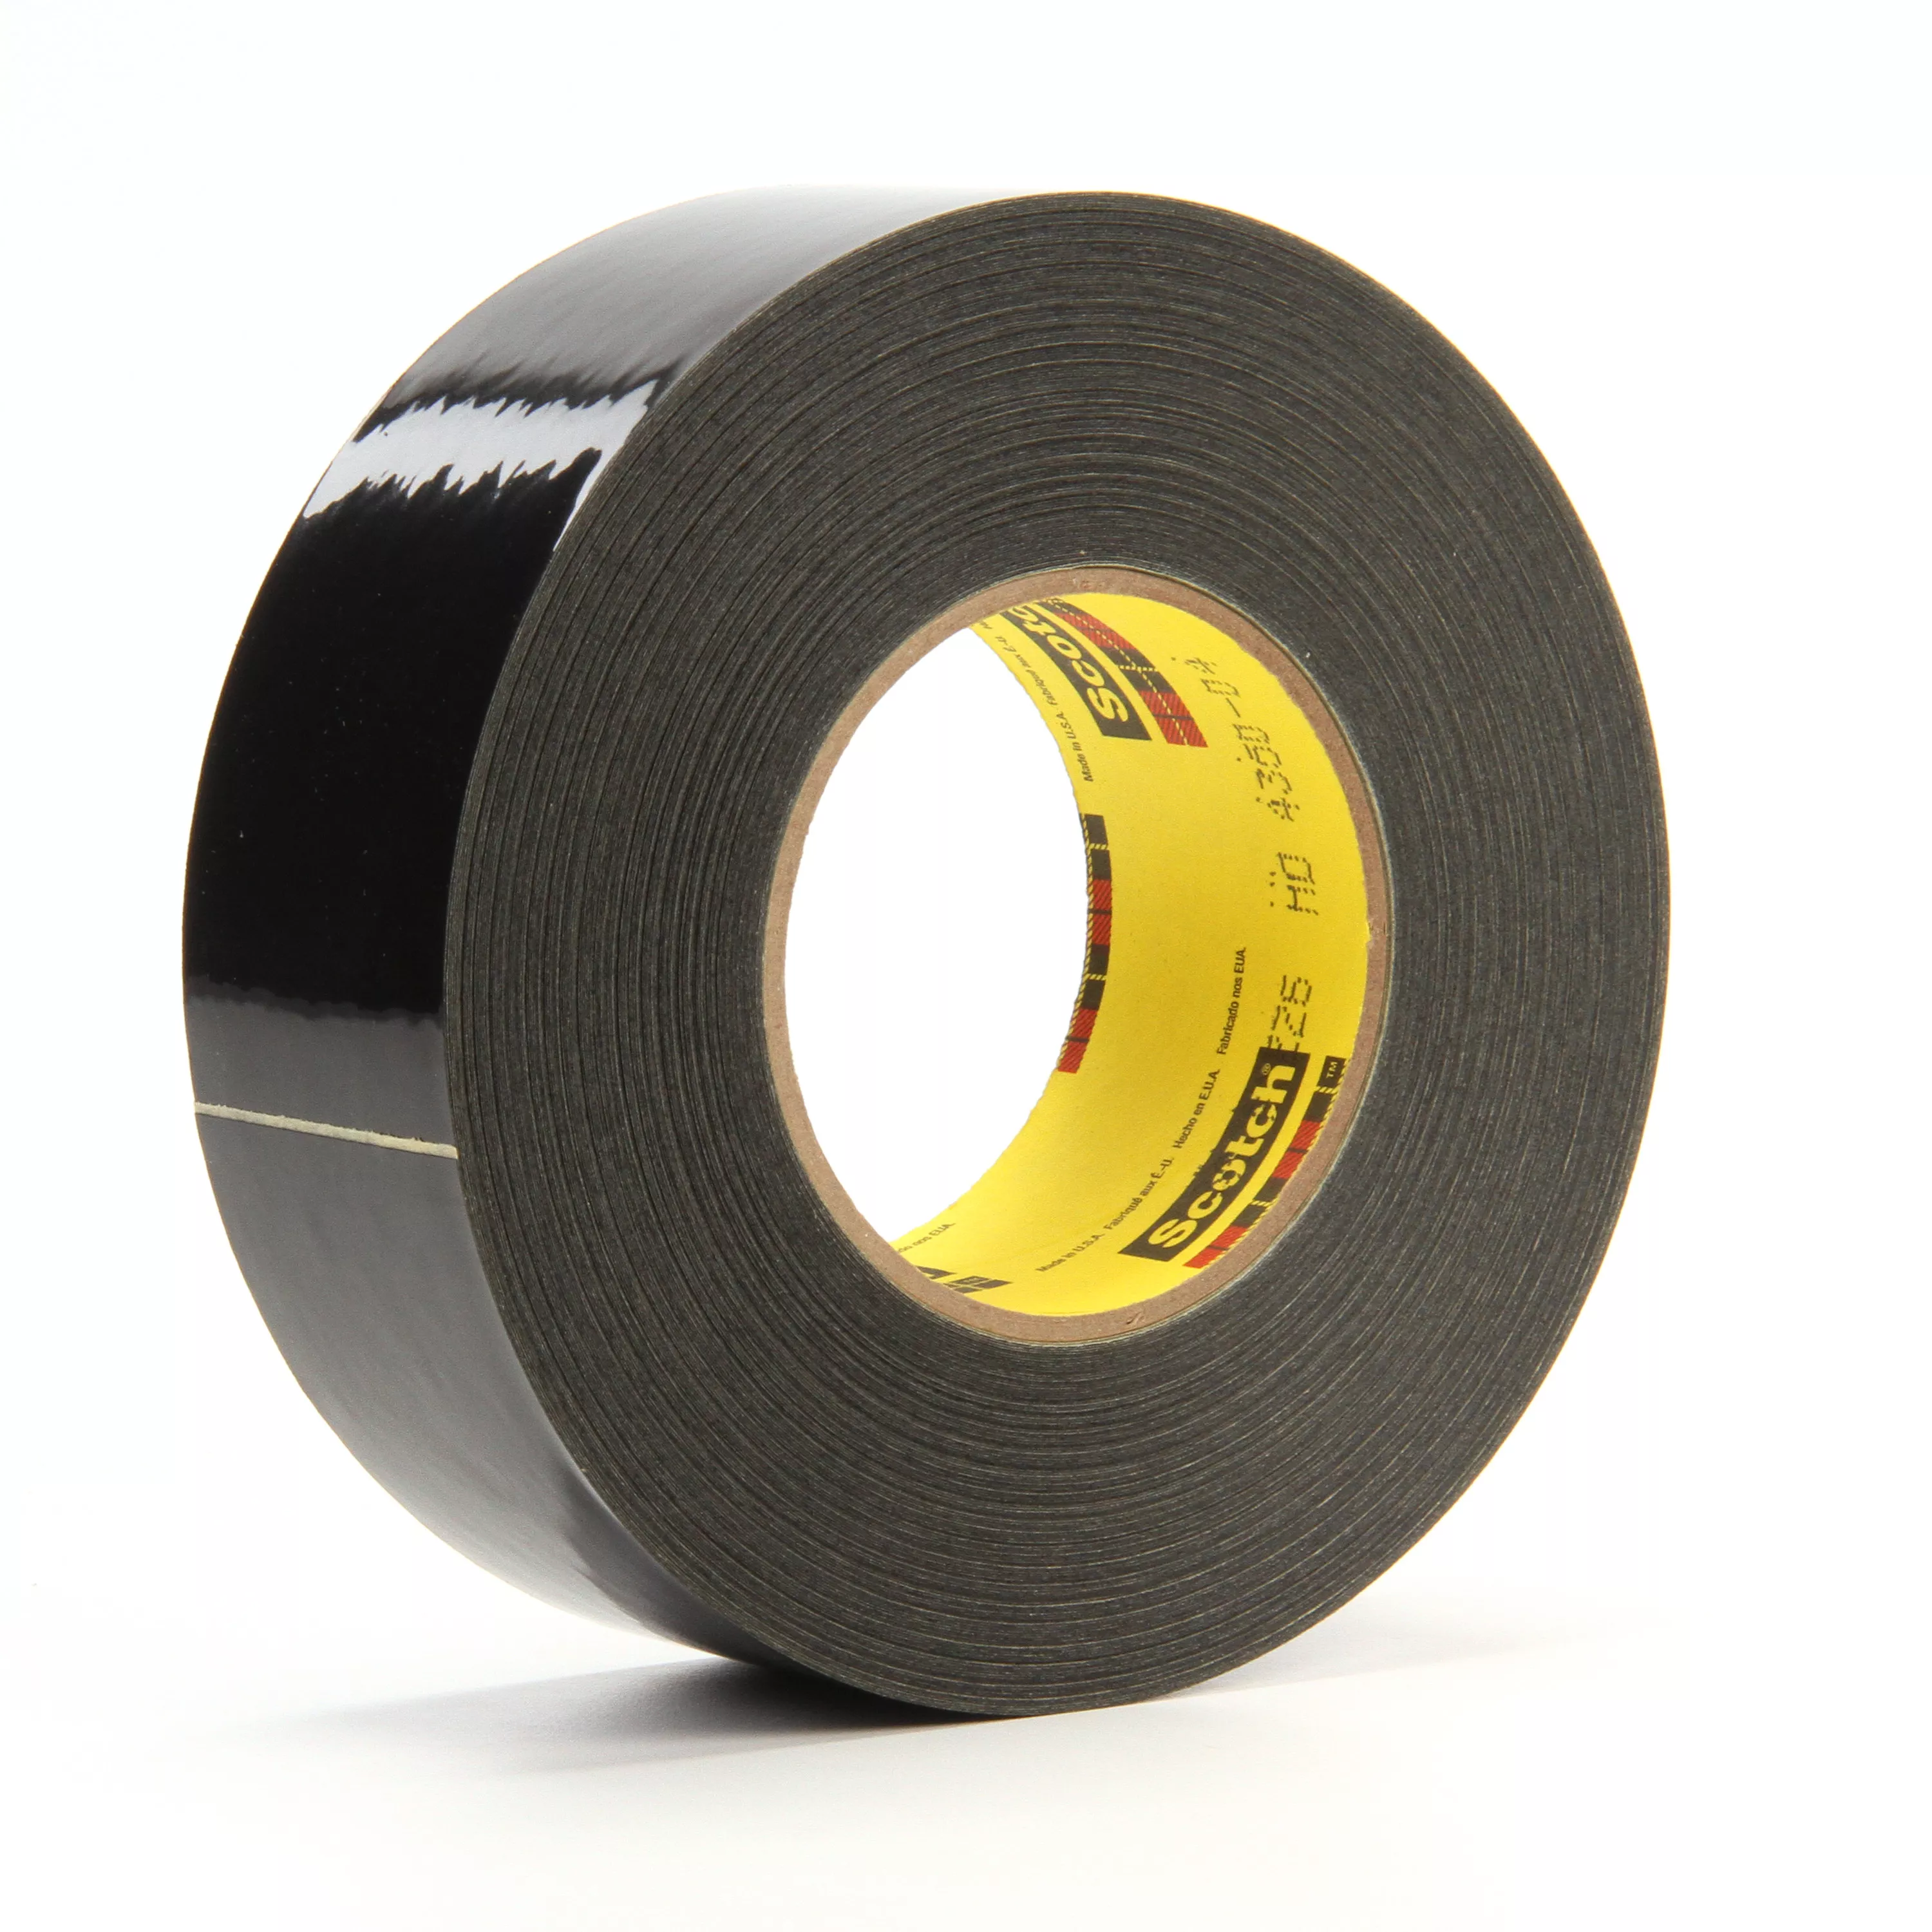 Scotch® Solvent Resistant Masking Tape 226, Black, 2 in x 60 yd, 10.6
mil, 24/Case